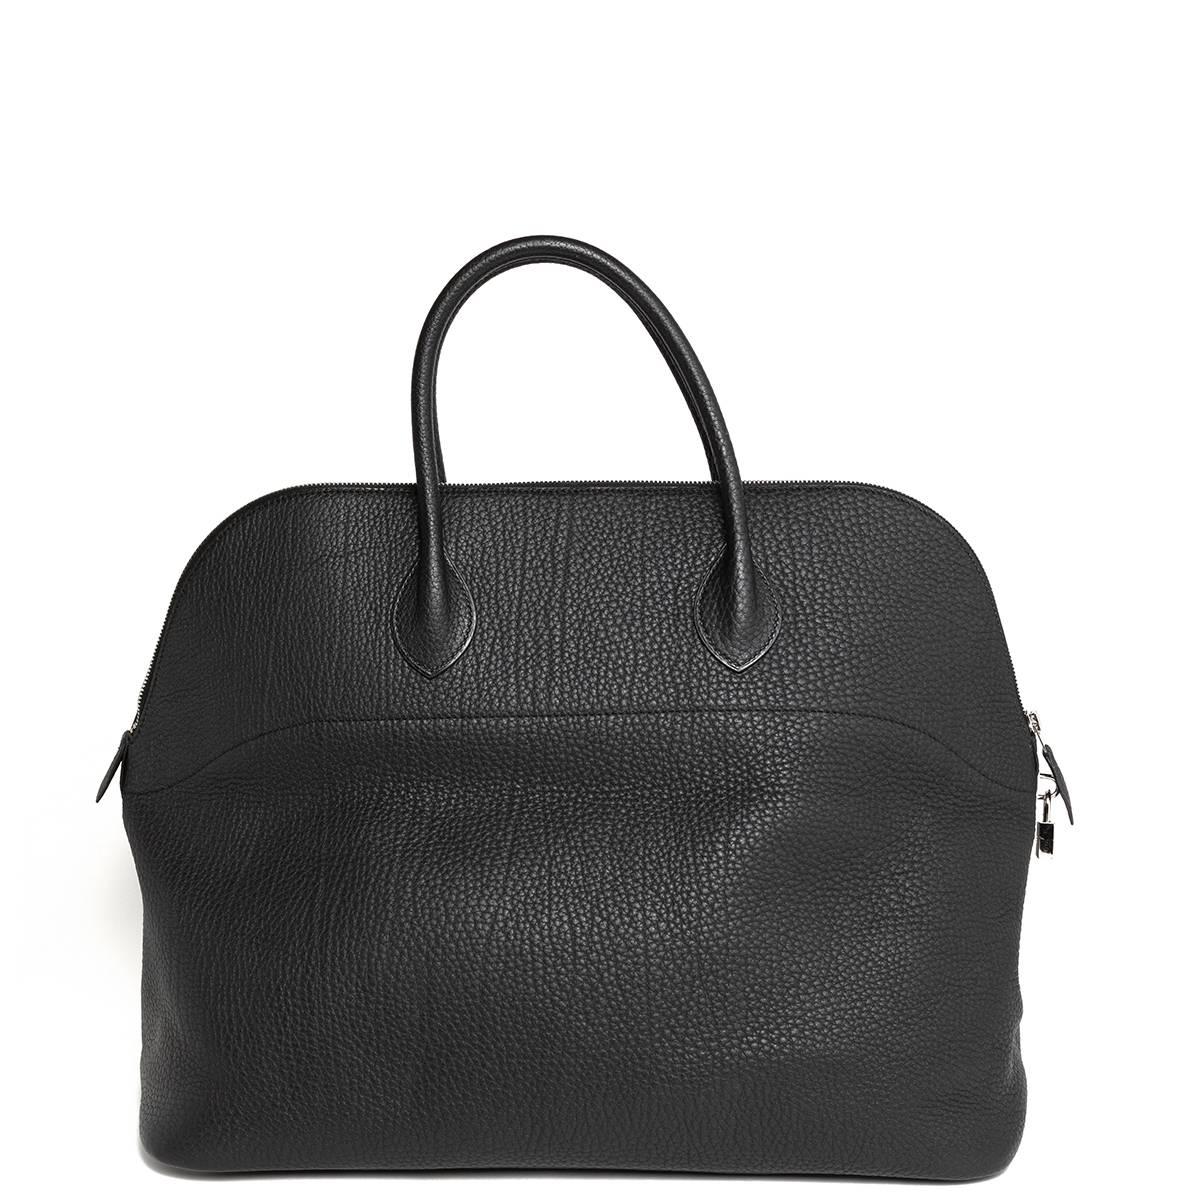 This is a beautiful Hermes bolide big size, in black fjord leather and silver hardwares.
